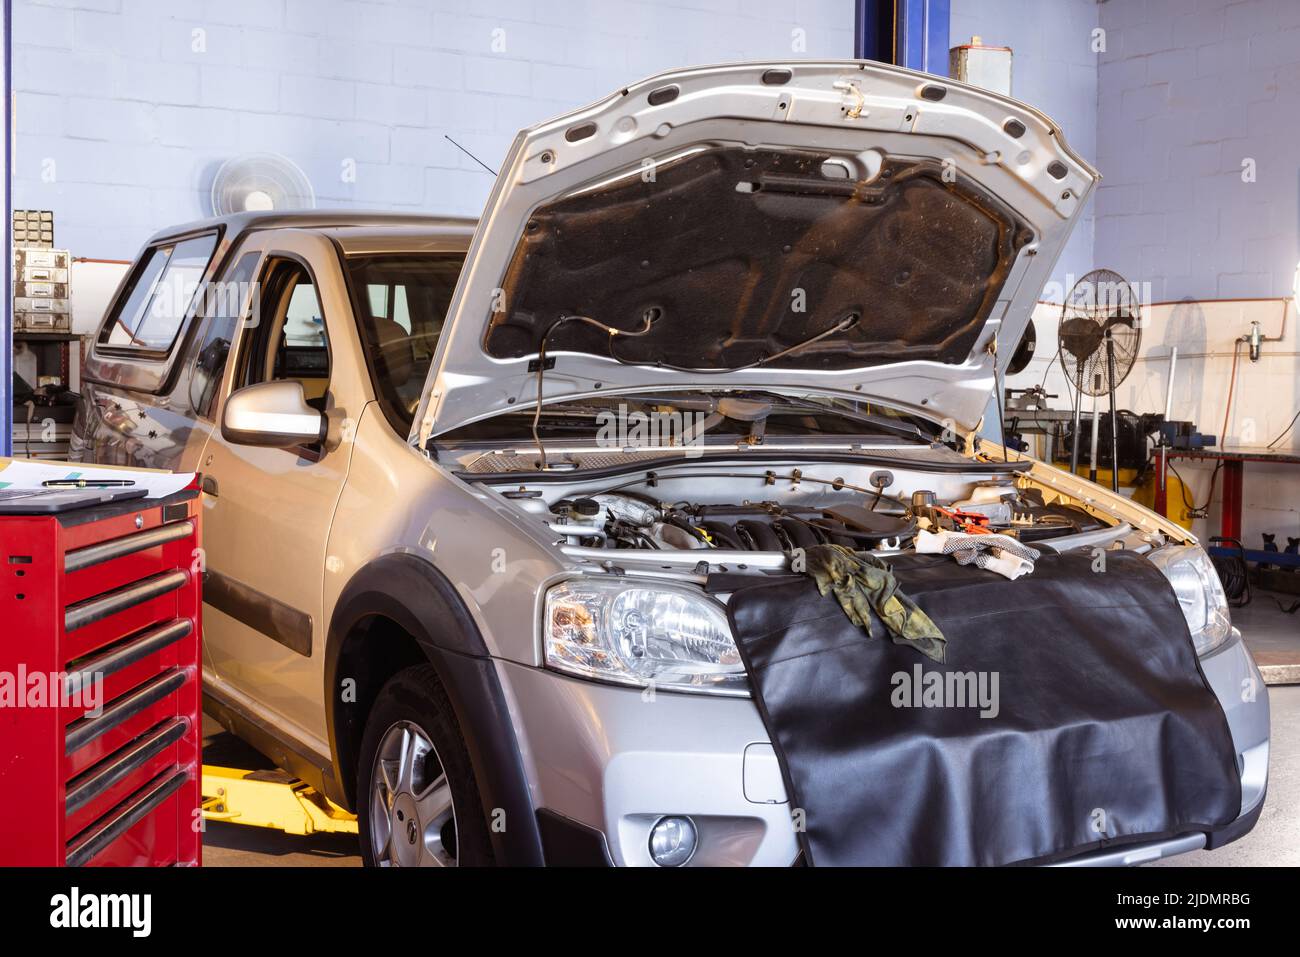 Image of faulty car with open bonnet for repair in workshop, copy space Stock Photo